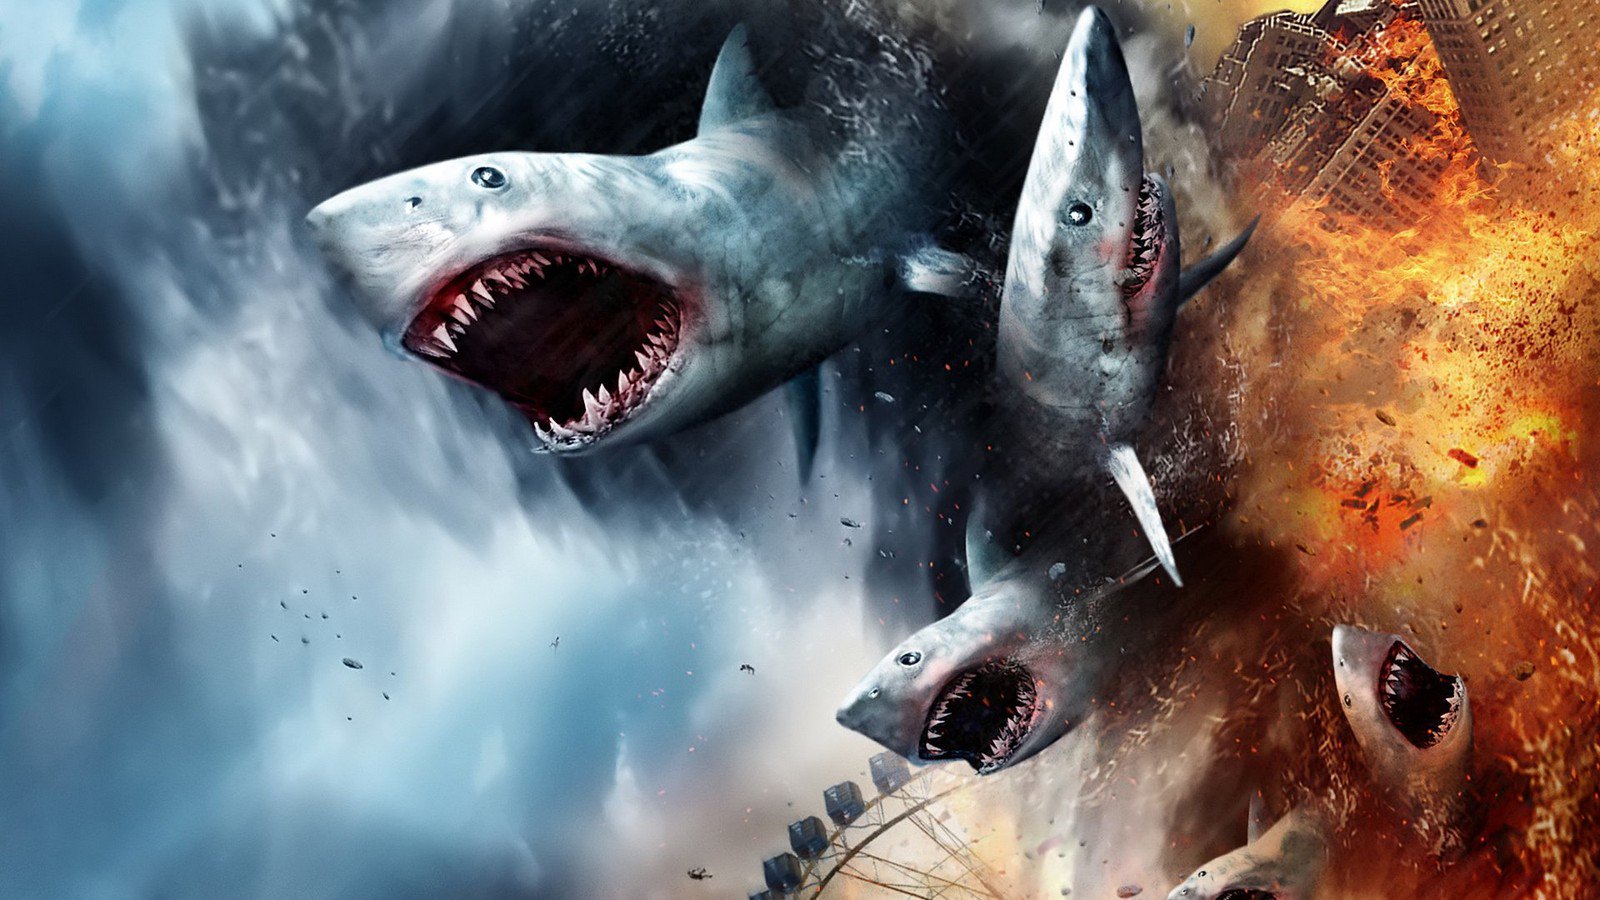 Sharknado 3: Oh Hell No! Backgrounds, Compatible - PC, Mobile, Gadgets| 1600x900 px